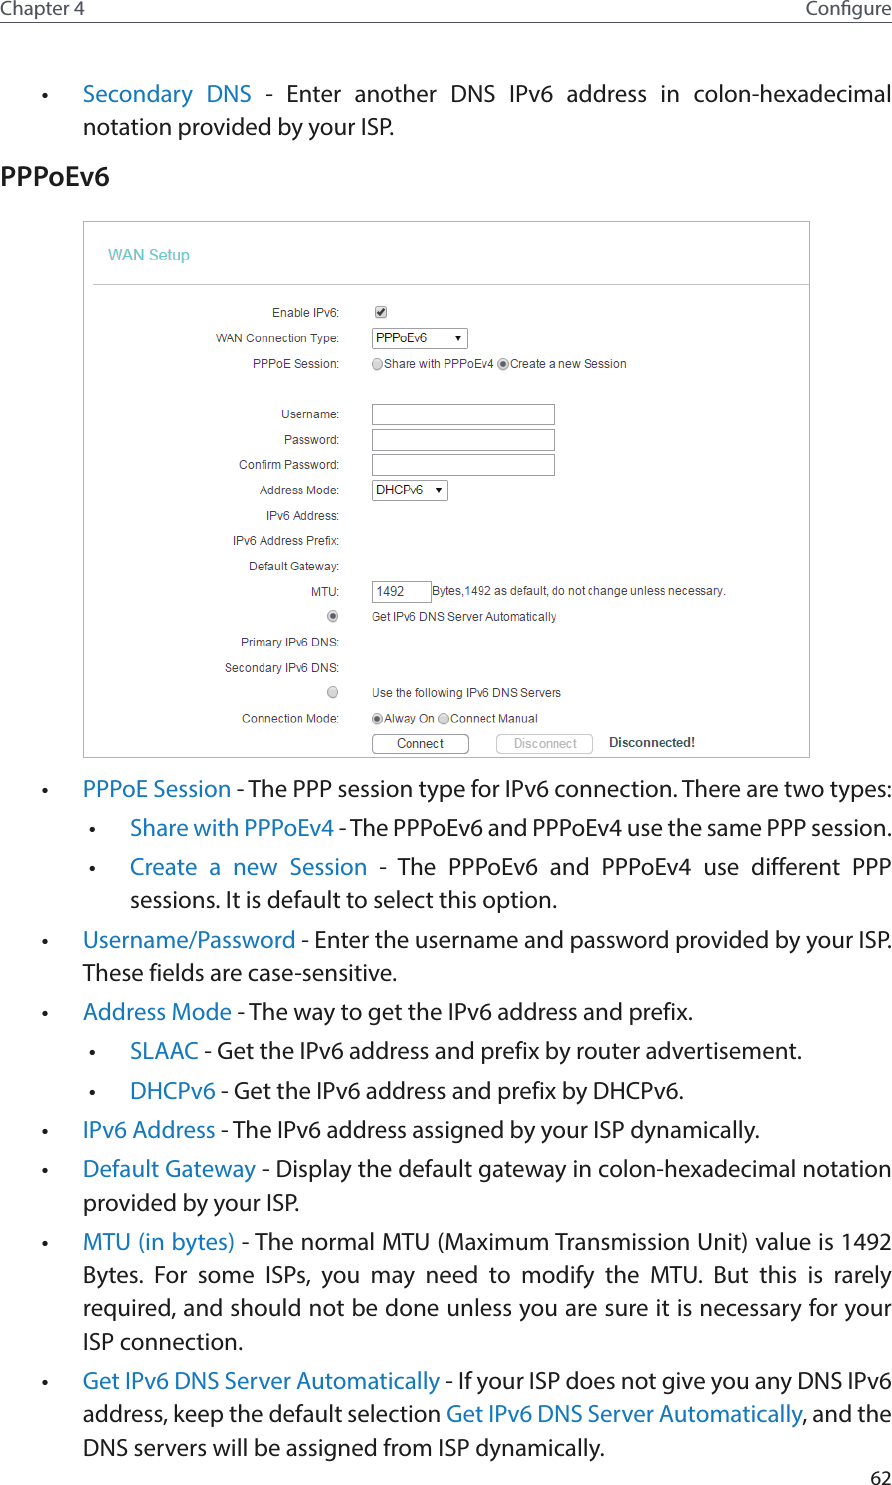 62Chapter 4 Congure•  Secondary DNS - Enter another DNS IPv6 address in colon-hexadecimal notation provided by your ISP.PPPoEv6 •  PPPoE Session - The PPP session type for IPv6 connection. There are two types:•  Share with PPPoEv4 - The PPPoEv6 and PPPoEv4 use the same PPP session.•  Create a new Session - The PPPoEv6 and PPPoEv4 use different PPP sessions. It is default to select this option.•  Username/Password - Enter the username and password provided by your ISP. These fields are case-sensitive.•  Address Mode - The way to get the IPv6 address and prefix. •  SLAAC - Get the IPv6 address and prefix by router advertisement. •  DHCPv6 - Get the IPv6 address and prefix by DHCPv6. •  IPv6 Address - The IPv6 address assigned by your ISP dynamically.•  Default Gateway - Display the default gateway in colon-hexadecimal notation provided by your ISP.•  MTU (in bytes) - The normal MTU (Maximum Transmission Unit) value is 1492 Bytes. For some ISPs, you may need to modify the MTU. But this is rarely required, and should not be done unless you are sure it is necessary for your ISP connection.•  Get IPv6 DNS Server Automatically - If your ISP does not give you any DNS IPv6 address, keep the default selection Get IPv6 DNS Server Automatically, and the DNS servers will be assigned from ISP dynamically.